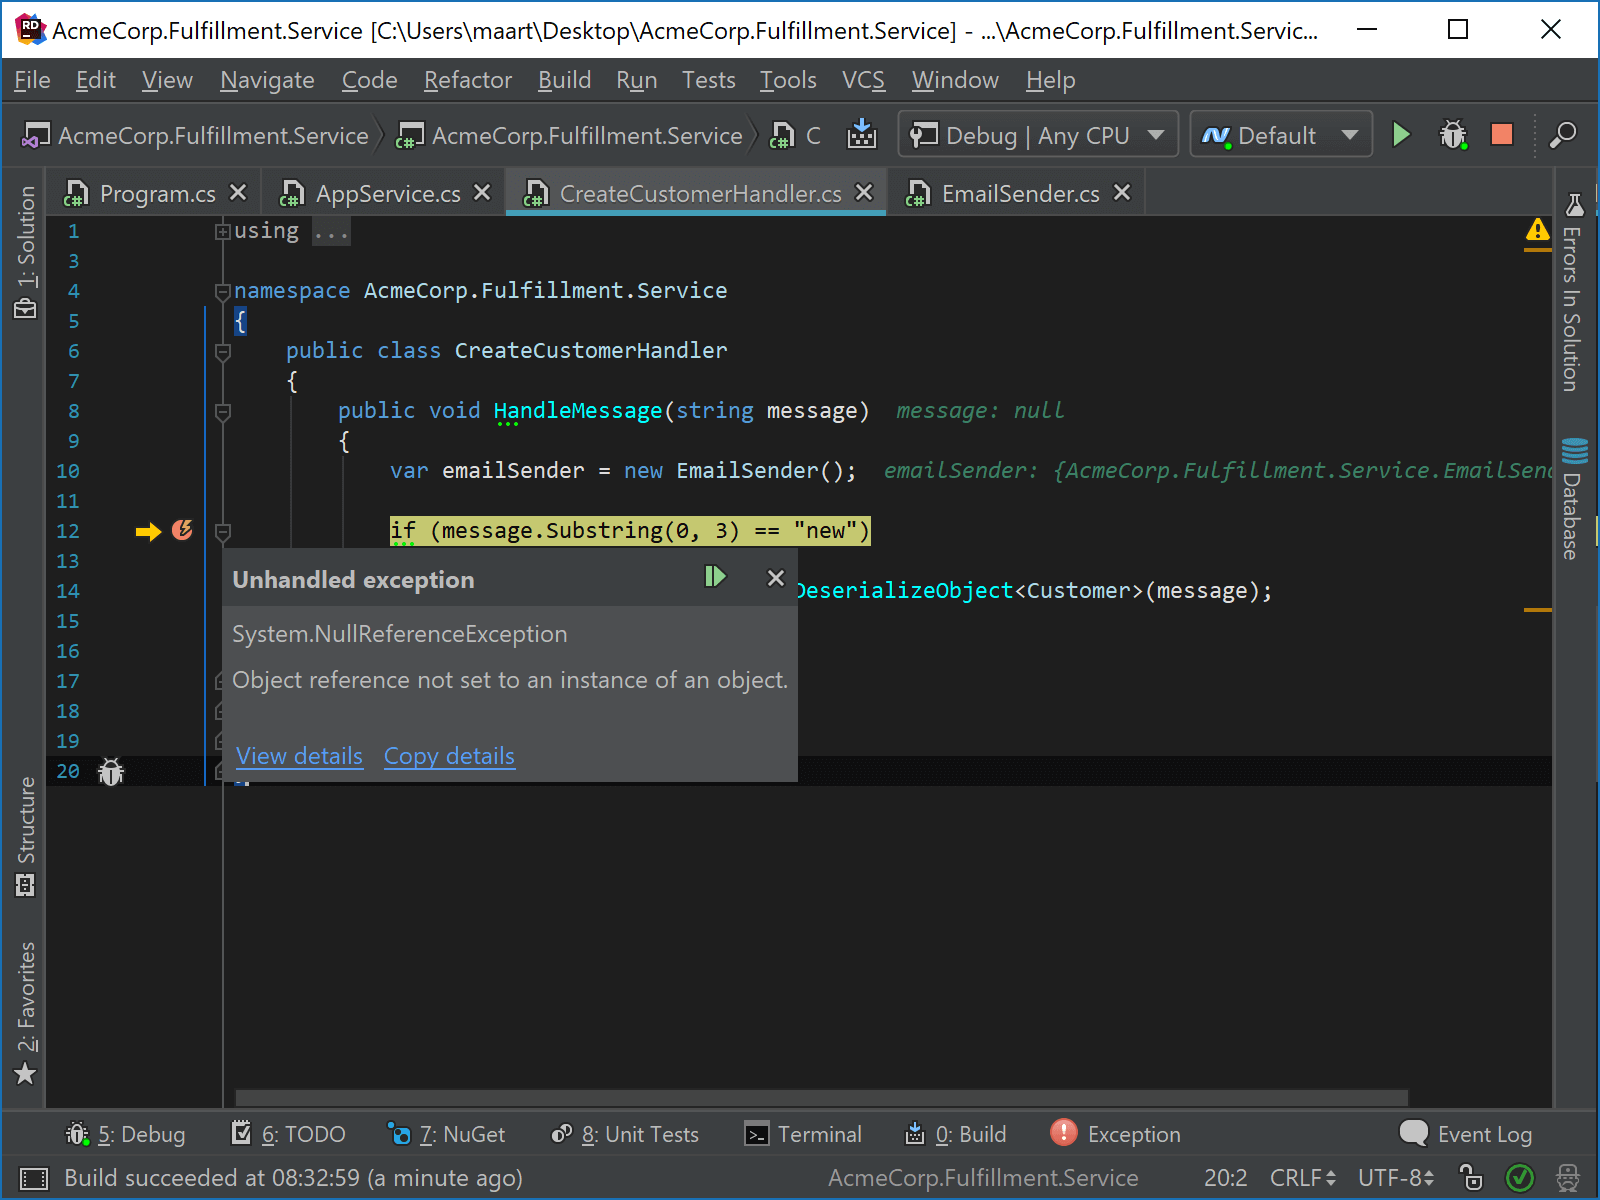 Explore Exception details with Rider's Exception popup